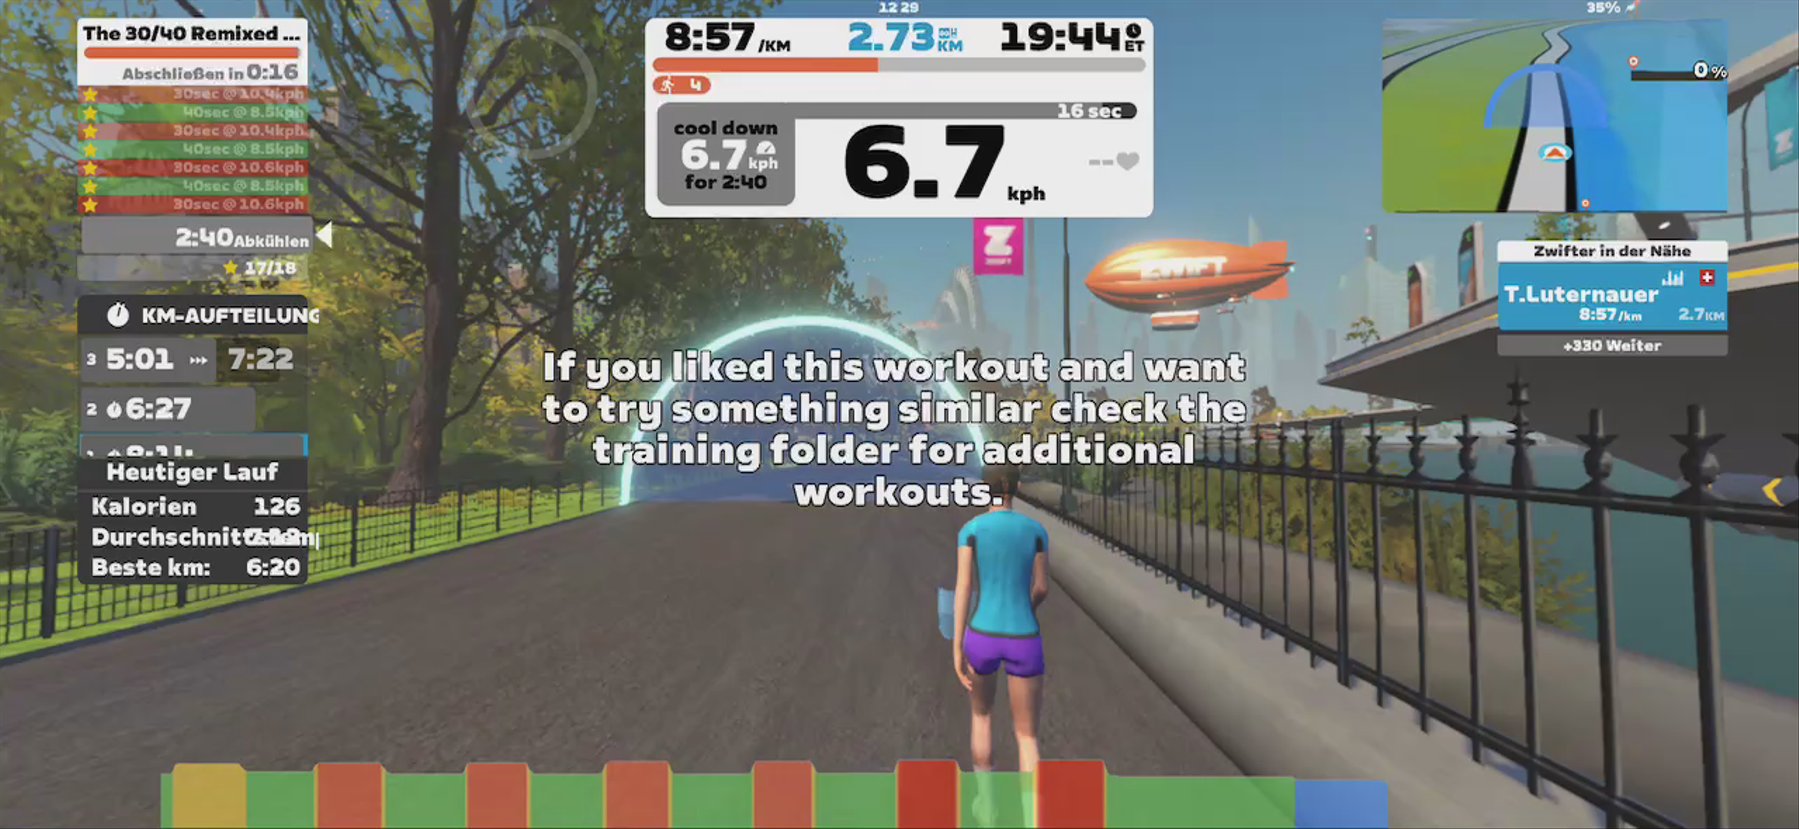 Zwift - The 30/40 Remixed #1 in New York